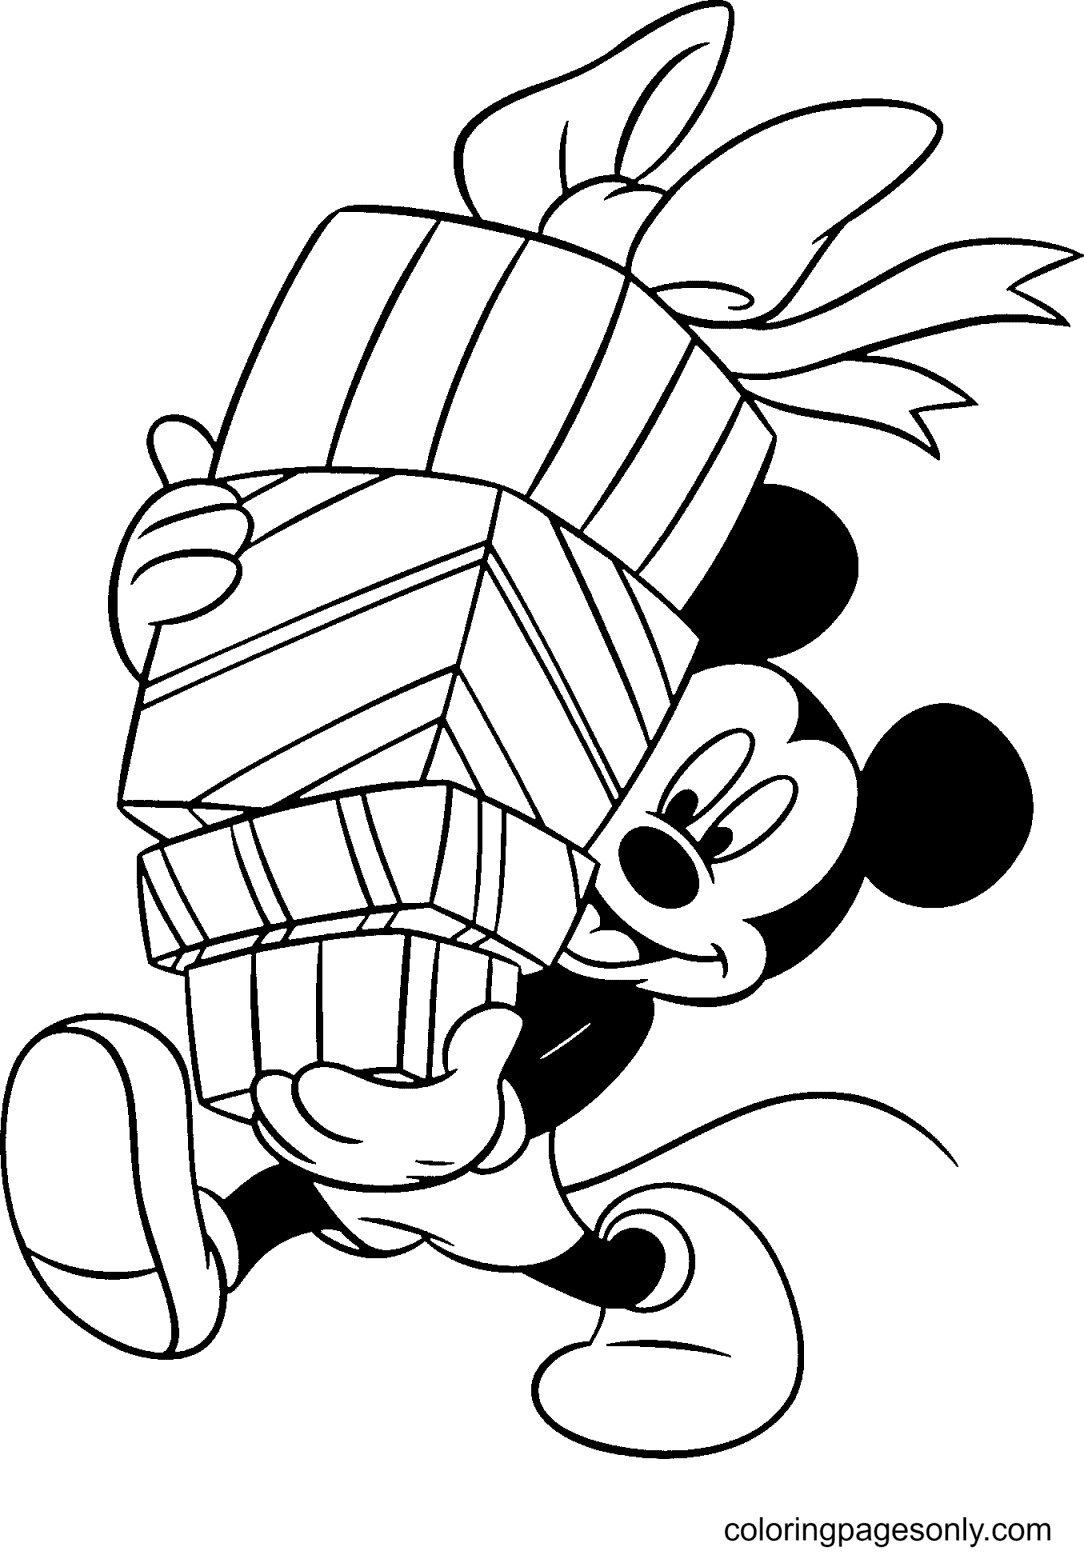 Mickey Mouse Holding Christmas Gifts Coloring Page